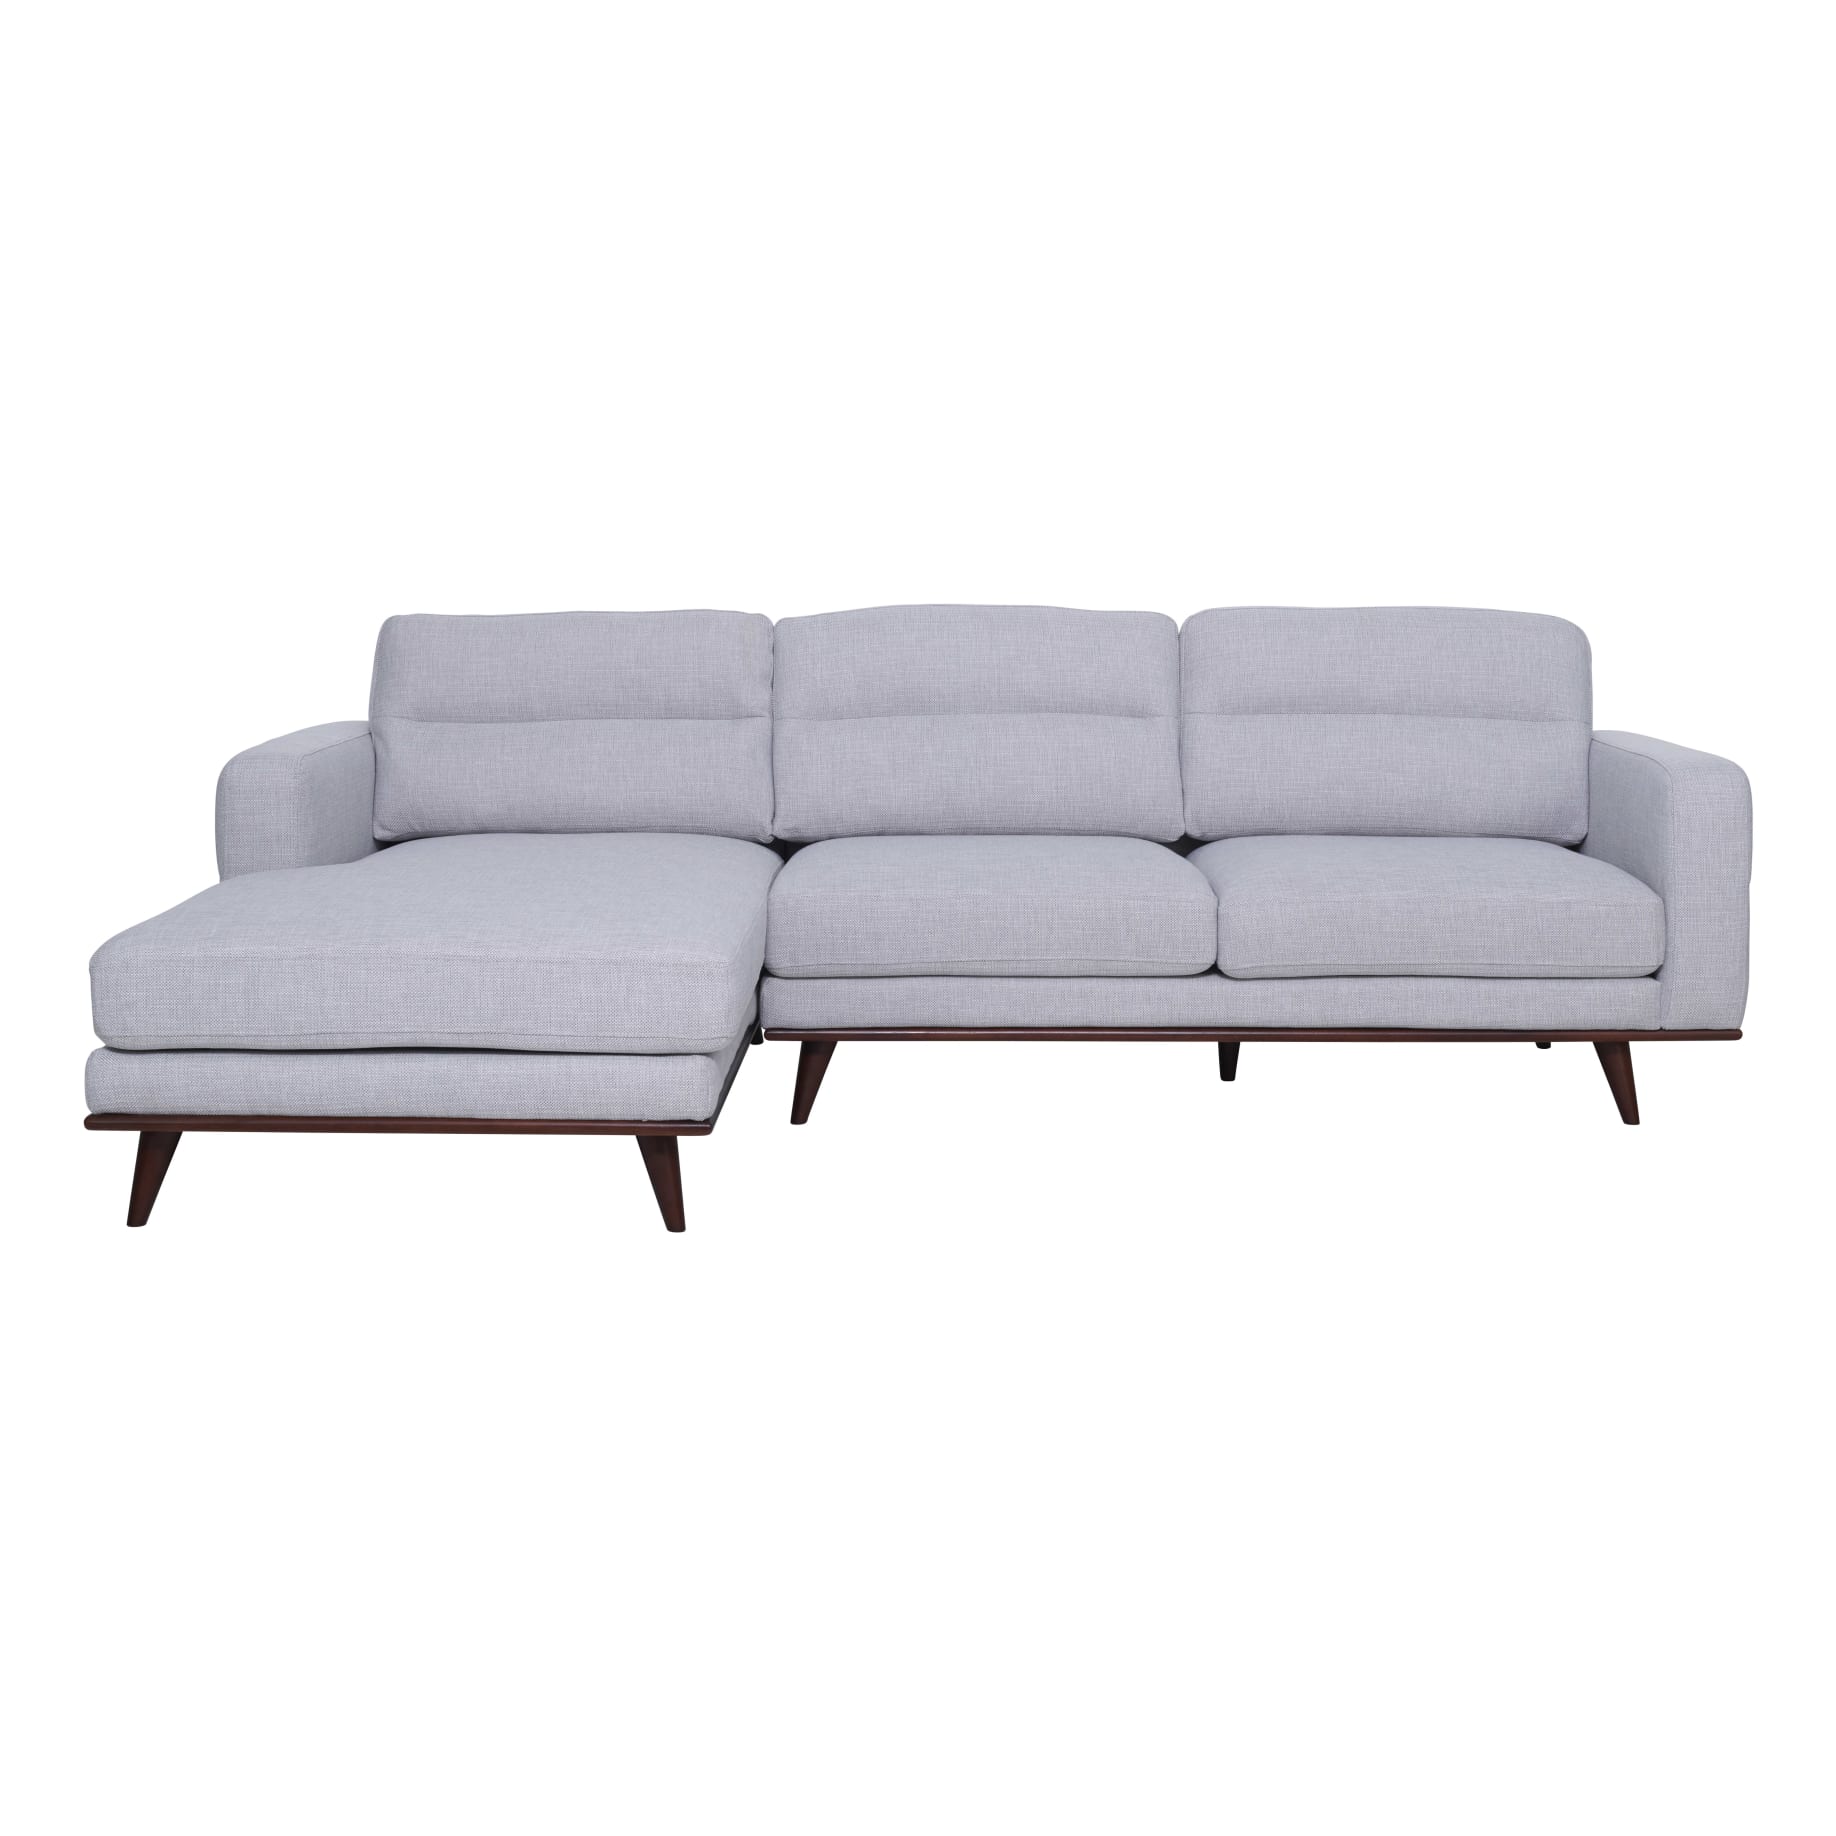 Astrid 2.5 Seater Sofa + Chaise LHF in Talent Silver